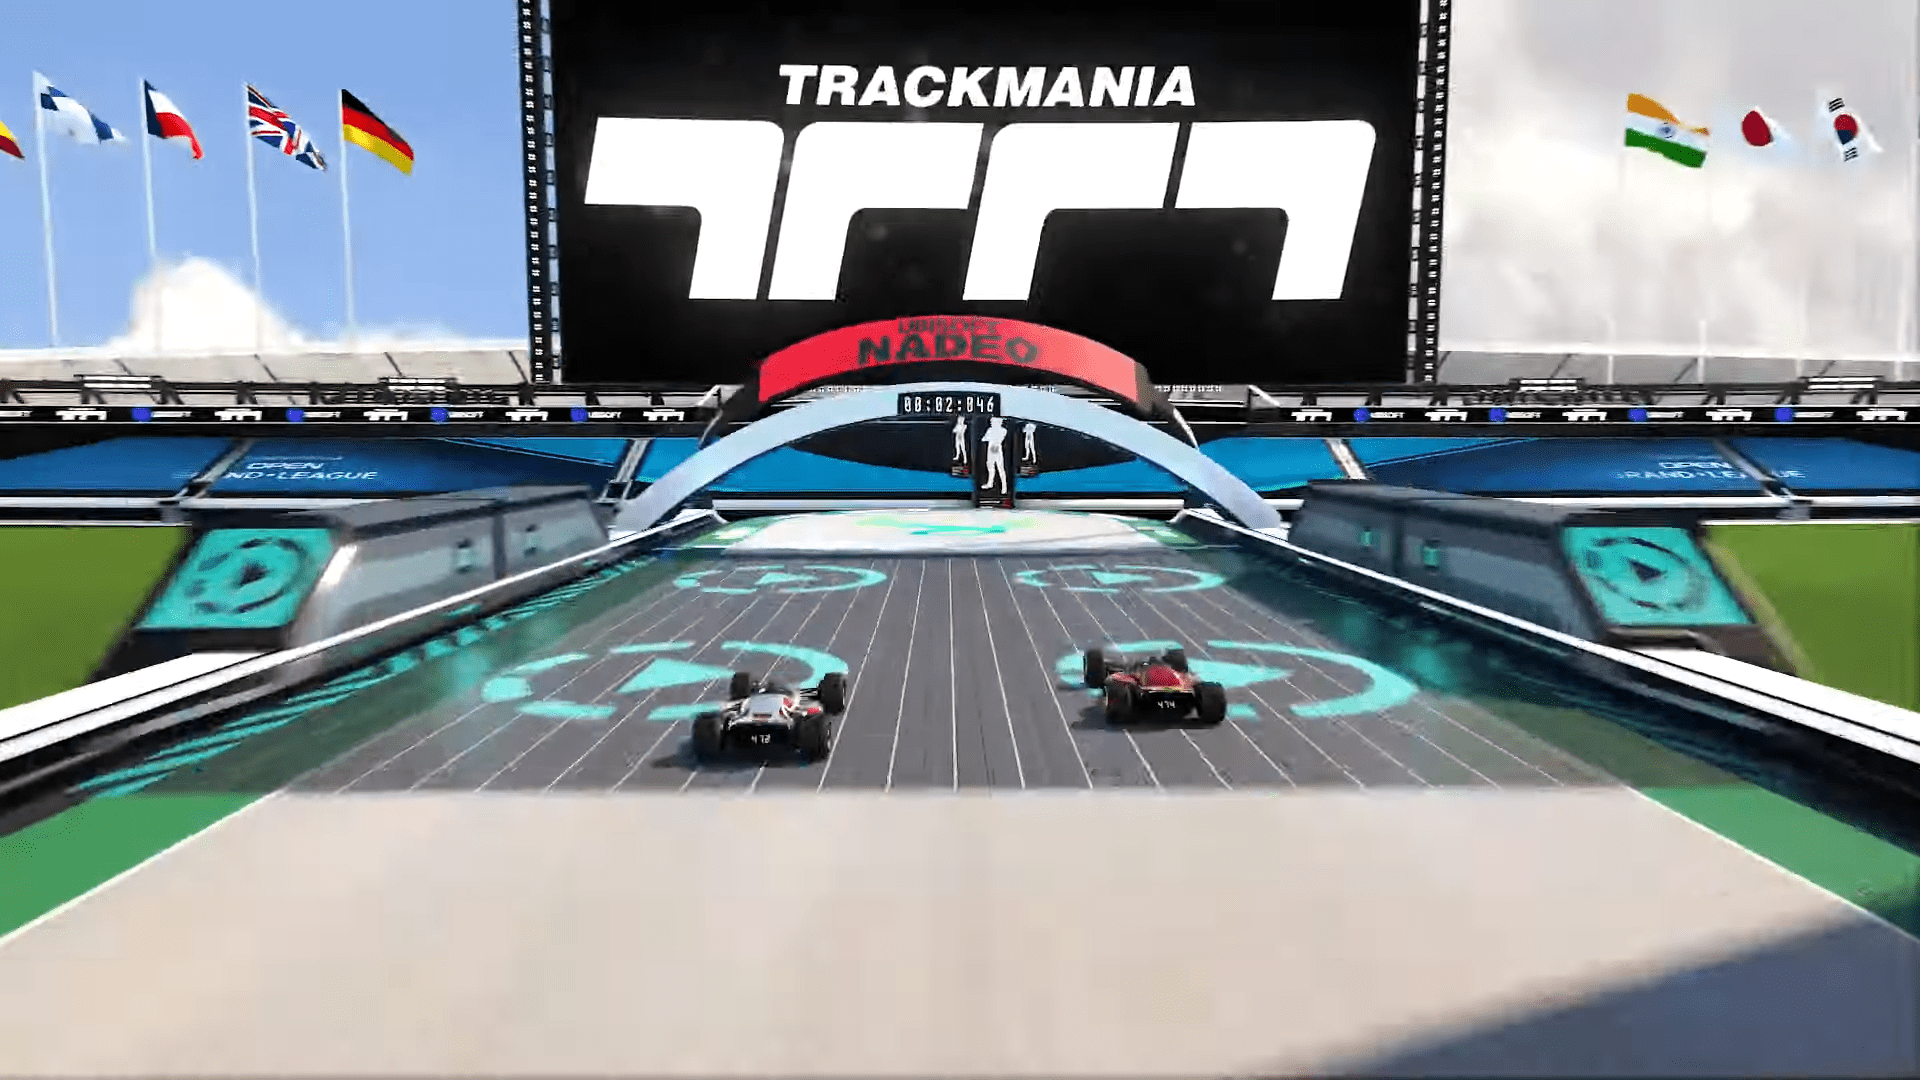 Ubisoft States Trackmania Subscription Service Isn’t A Subscription; It’s Limited Time Access